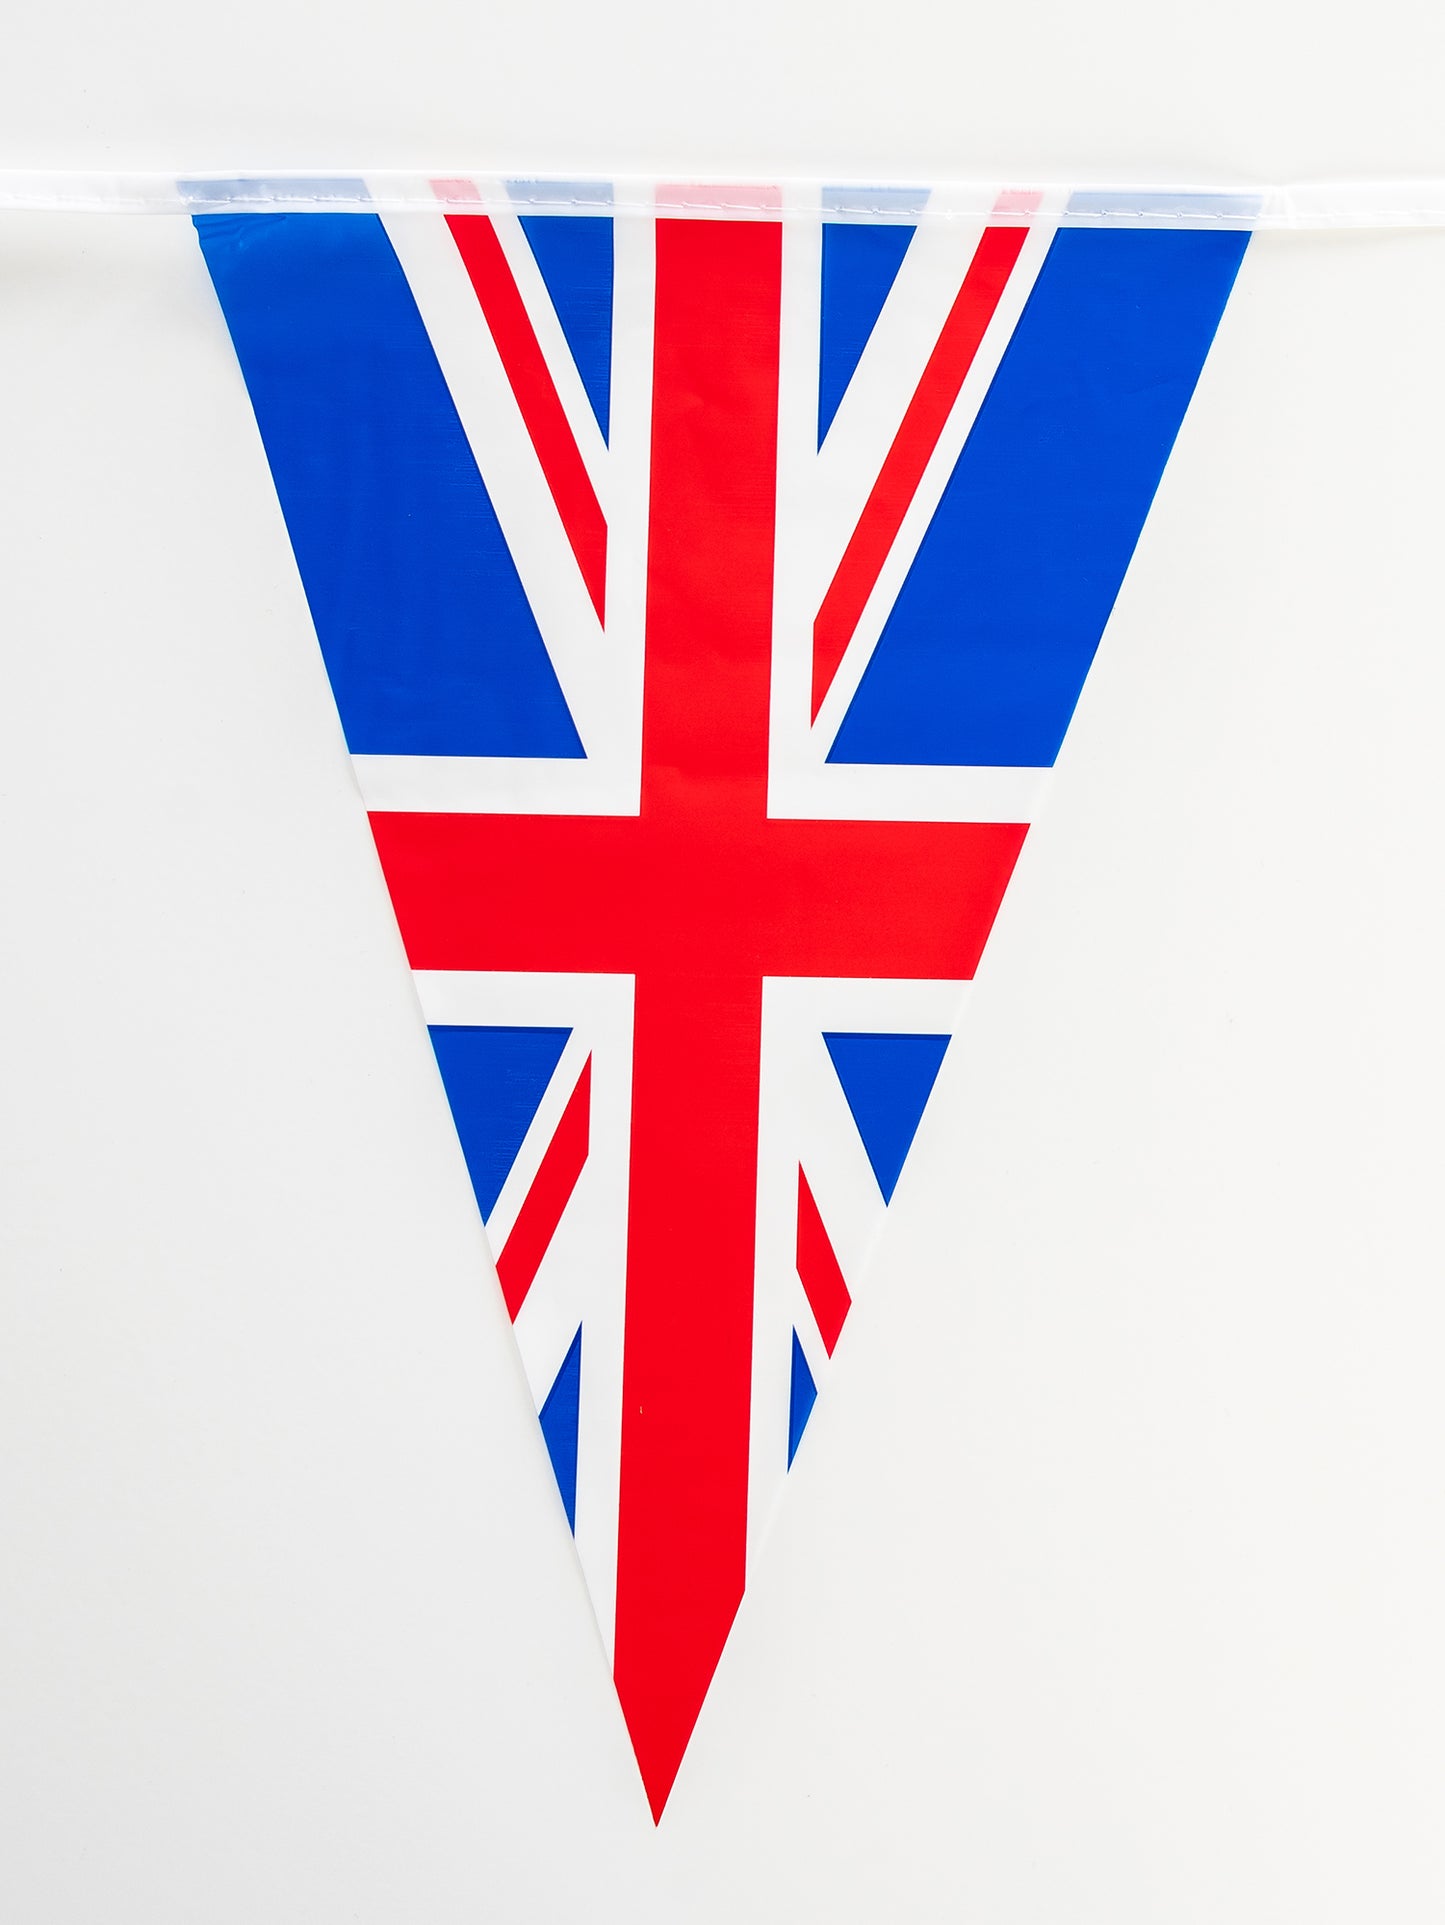 Union Jack Pennant Triangle Bunting - 10m String of British UK Flags